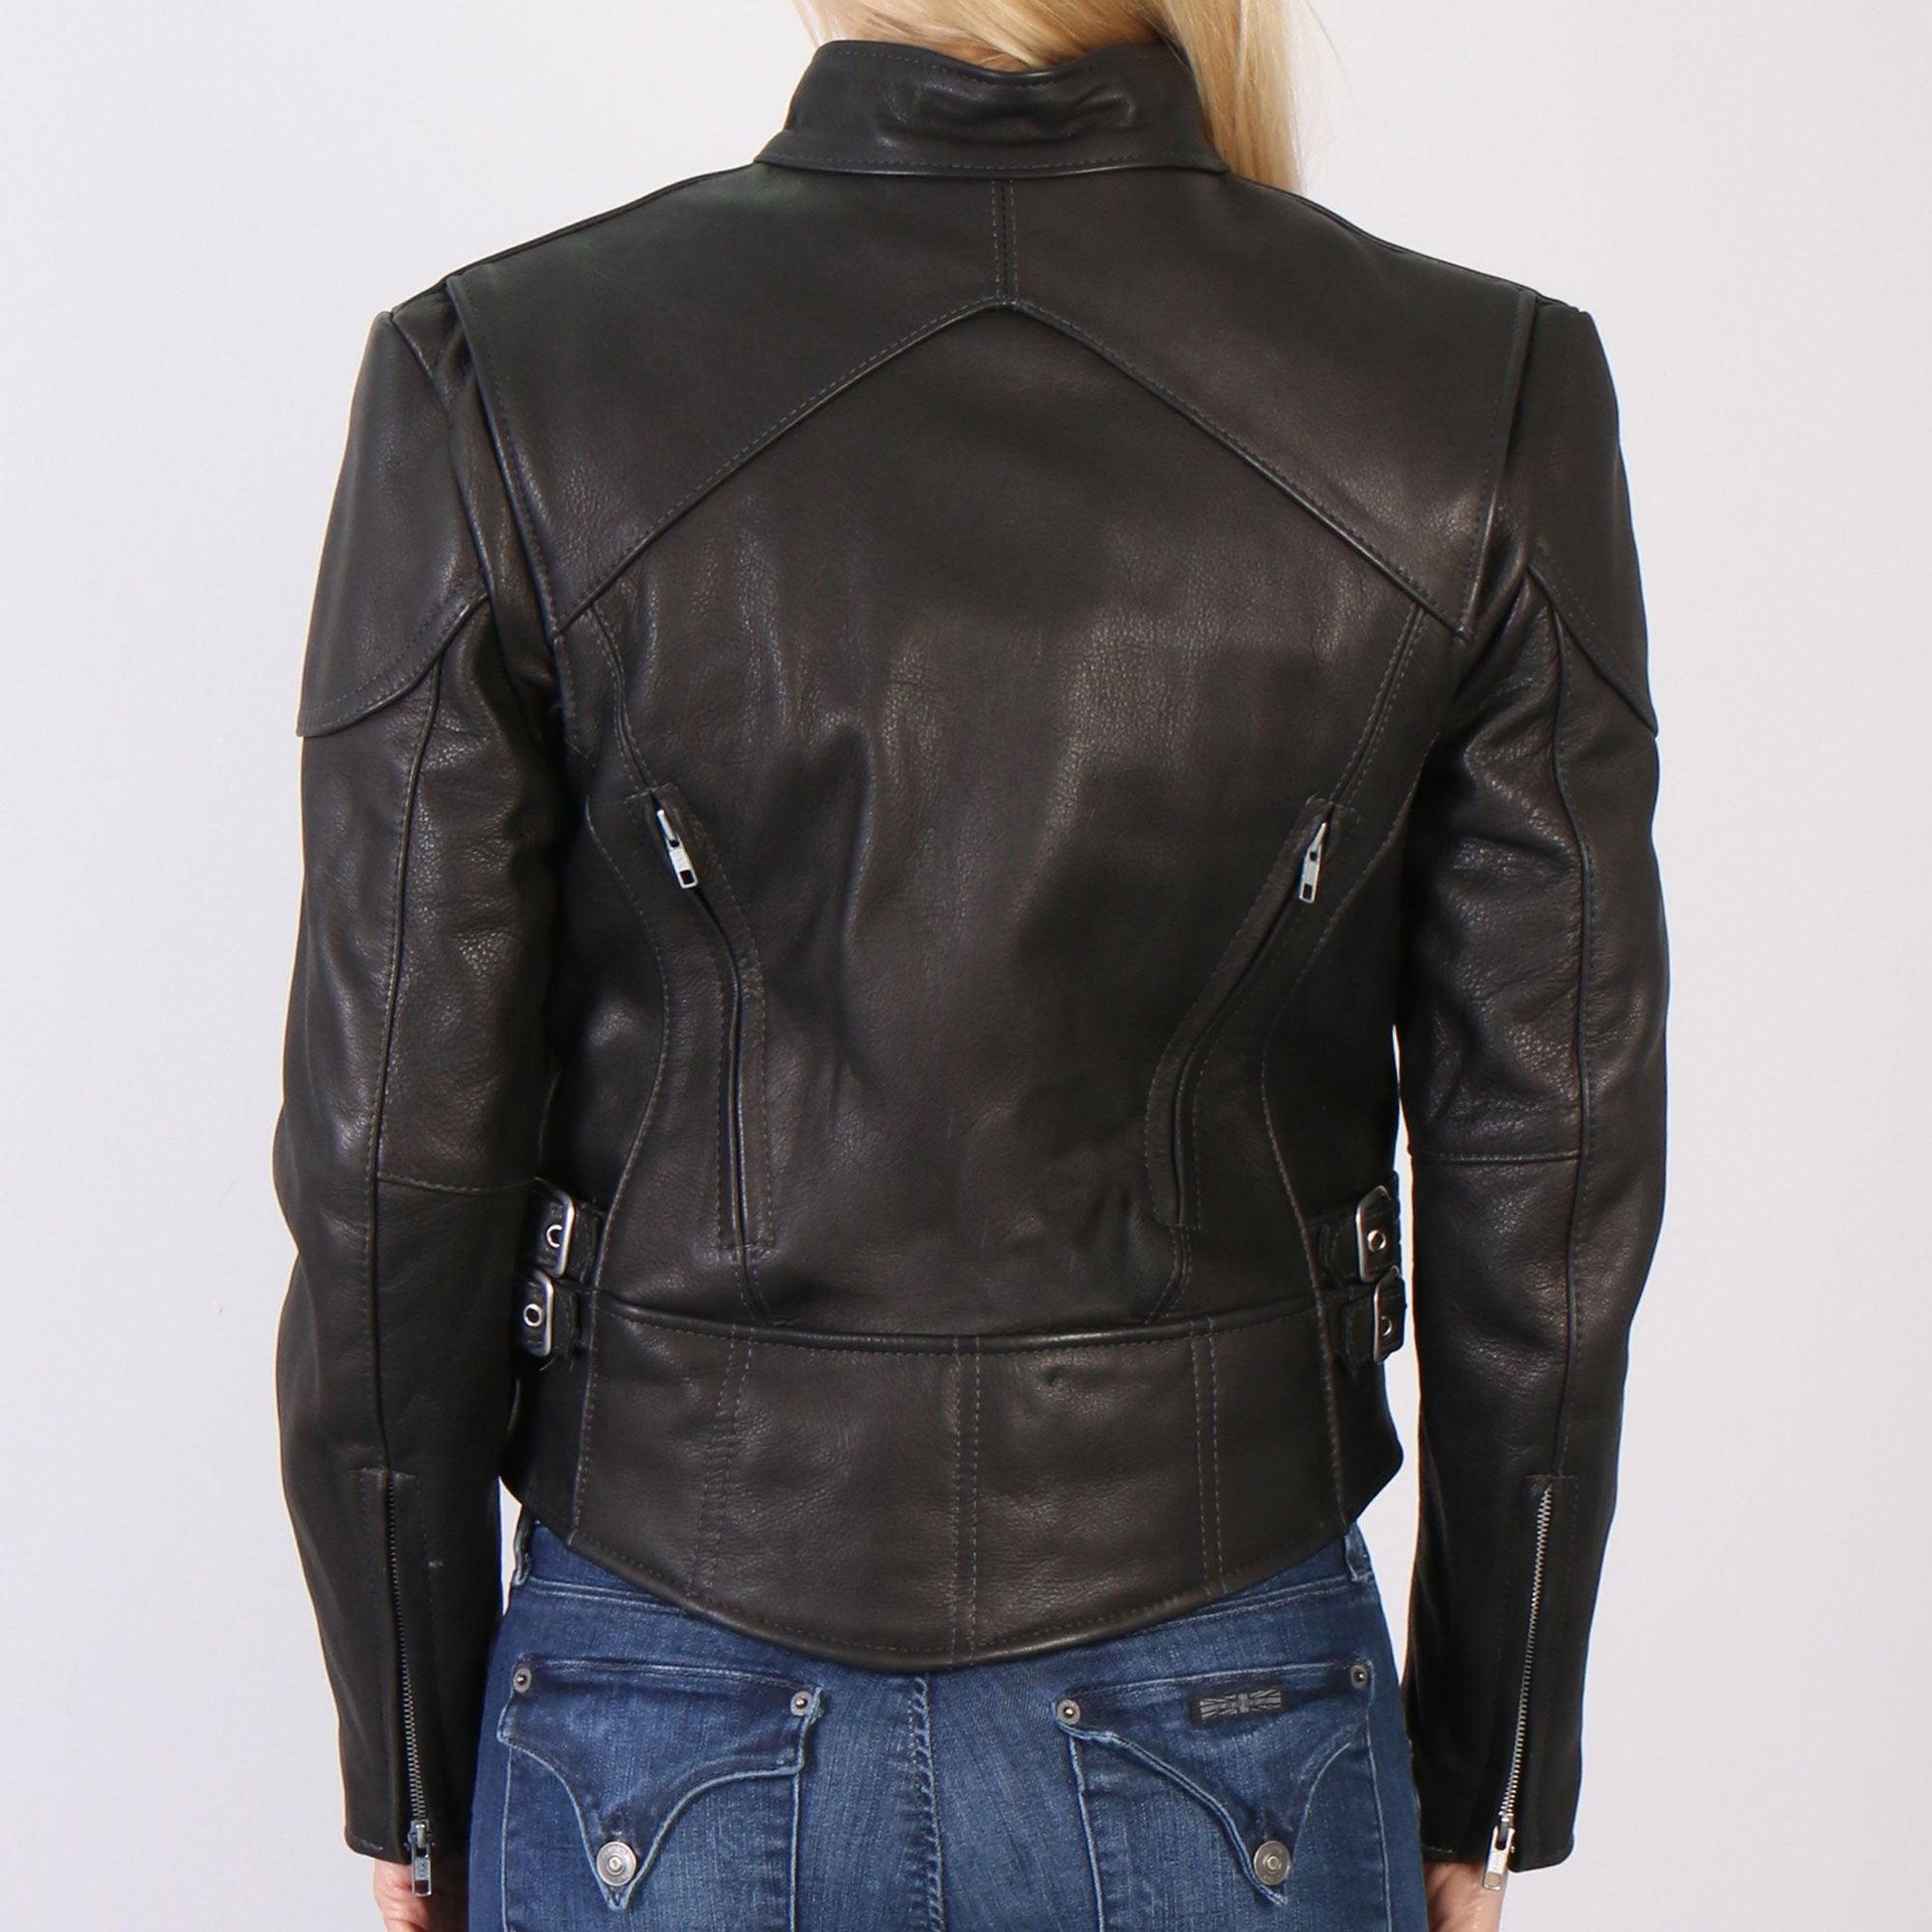 USA Made Ladies Vented Leather Jacket - Military Republic